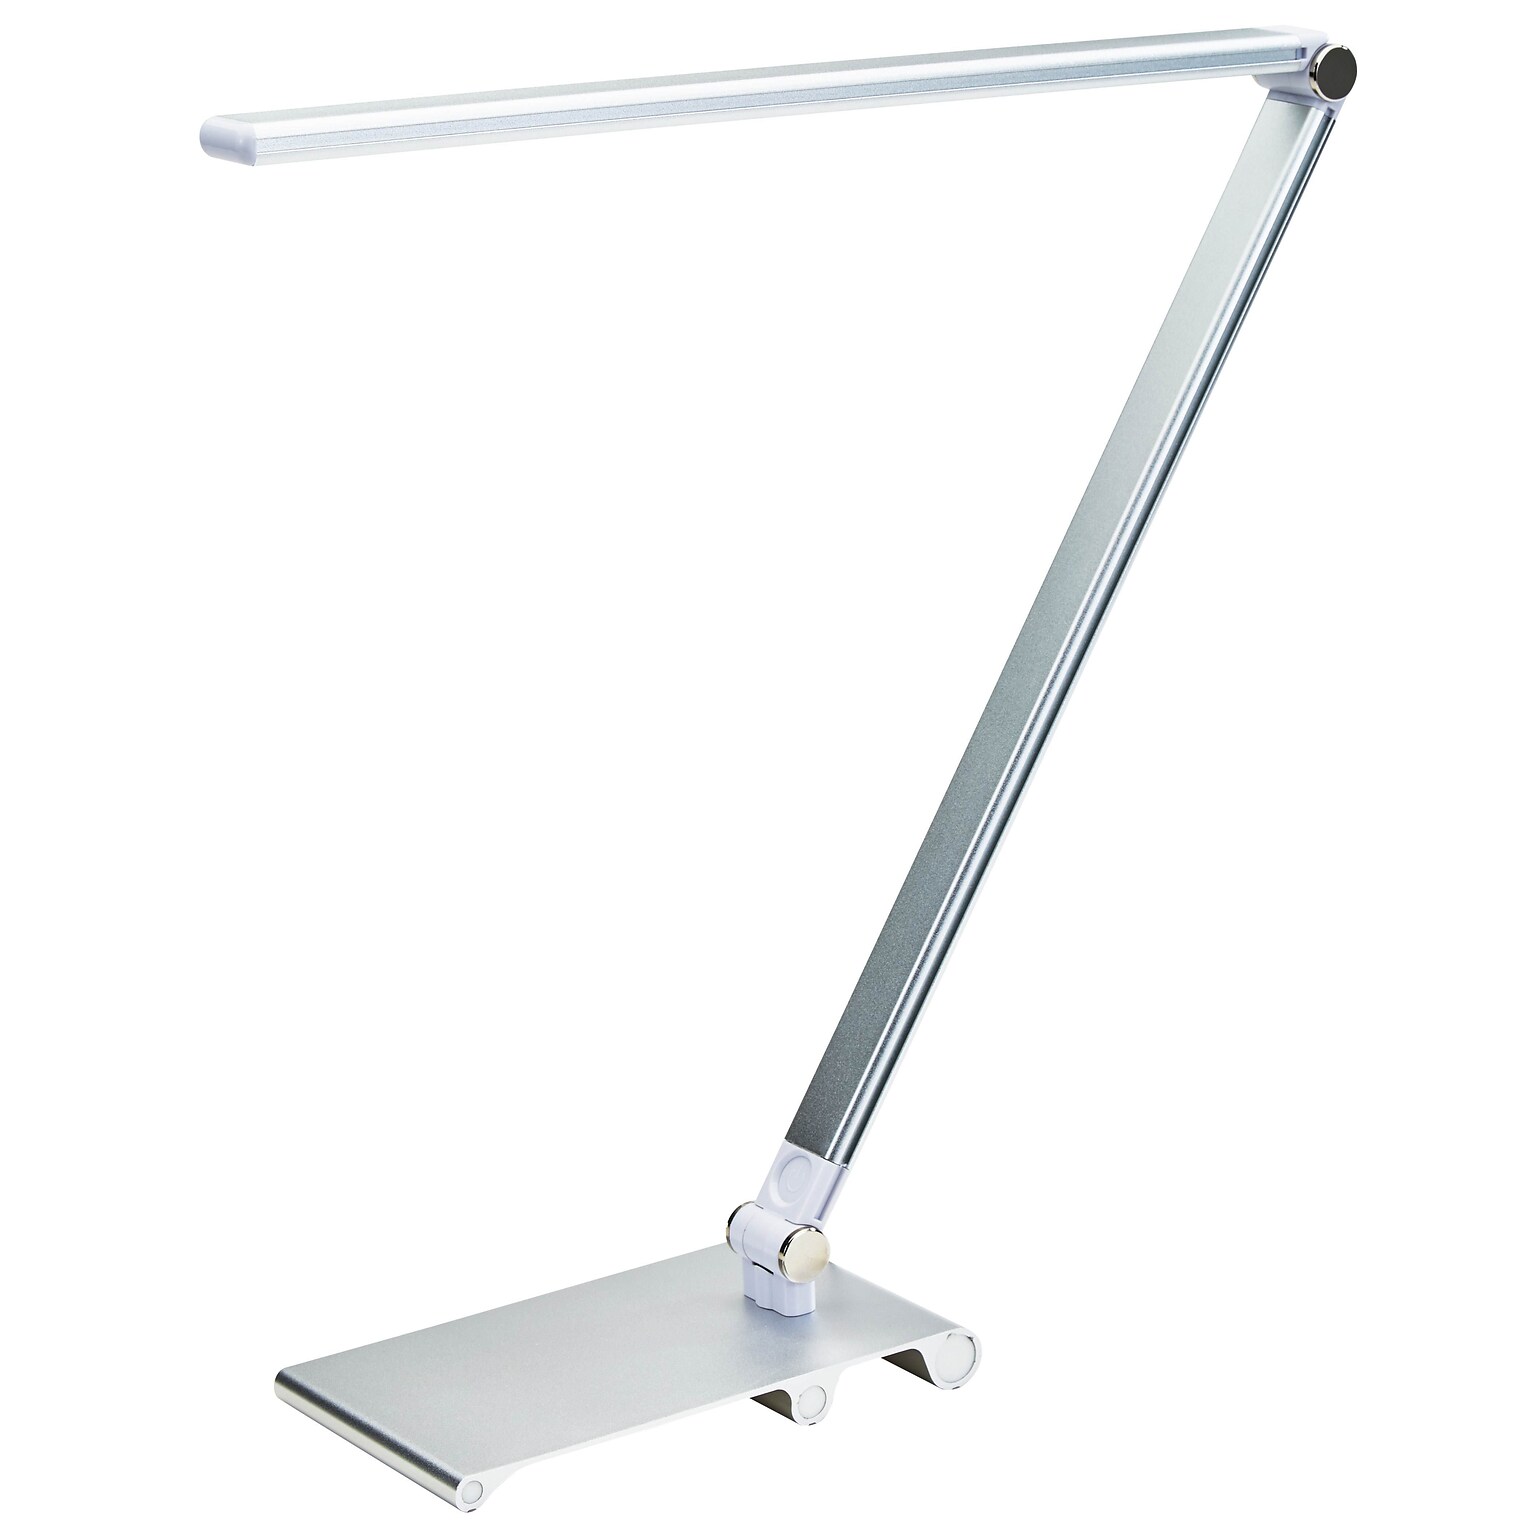 V-LIGHT LED Energy-Saving Task Lamp with Dimming Touch Switch, Silver (VSL129S)